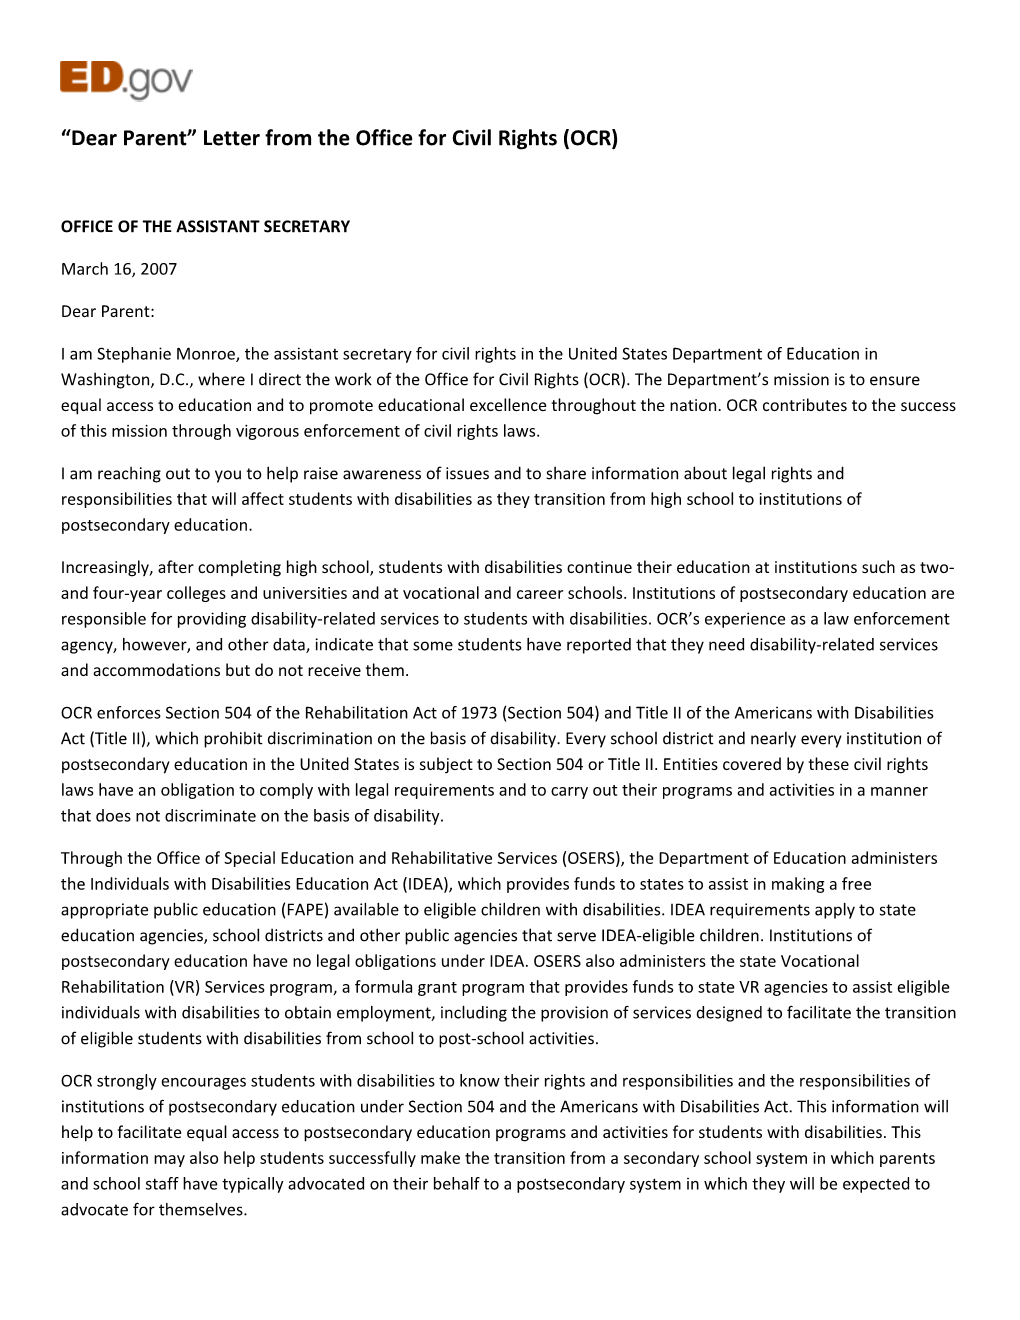 Dear Parent Letter from the Office for Civil Rights (OCR)